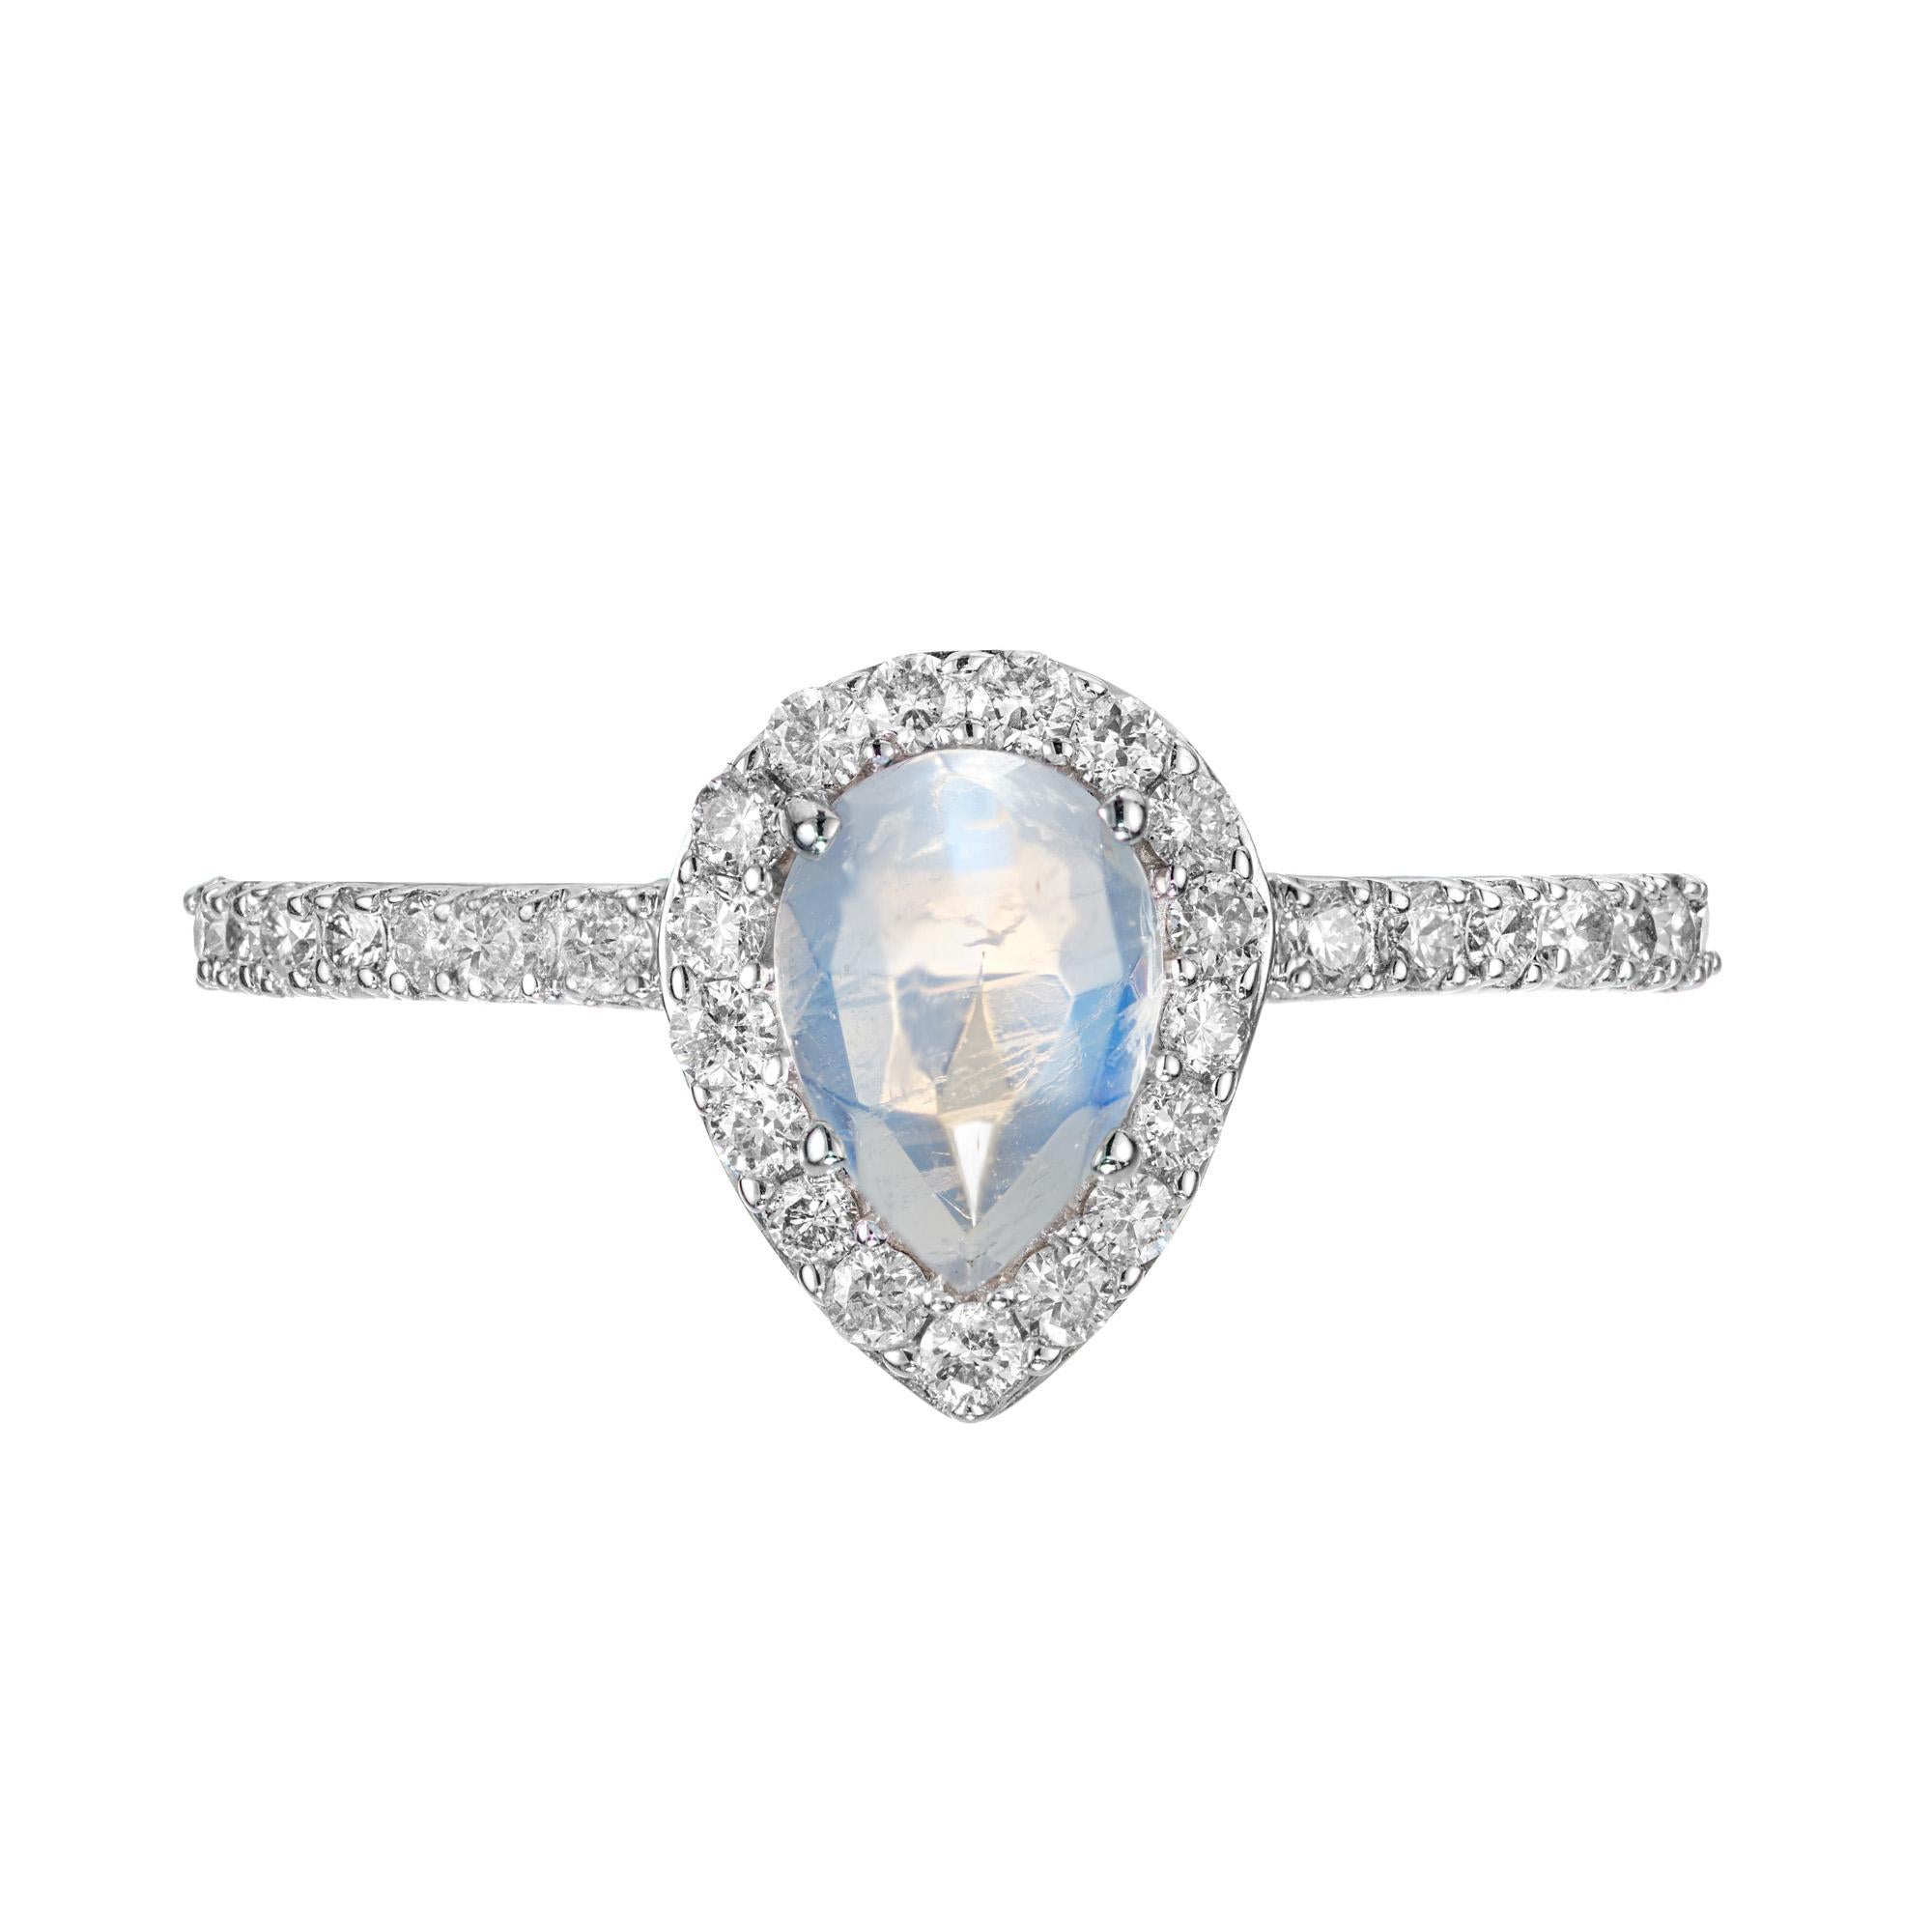 Pear shape diamond halo ring. .70cts Pear shaped bluish/white faceted cabochon moonstone center stone, set in a 14k white gold setting with a halo of round cut diamonds which are enriched with accent diamonds along the shank. Designed and crafted in